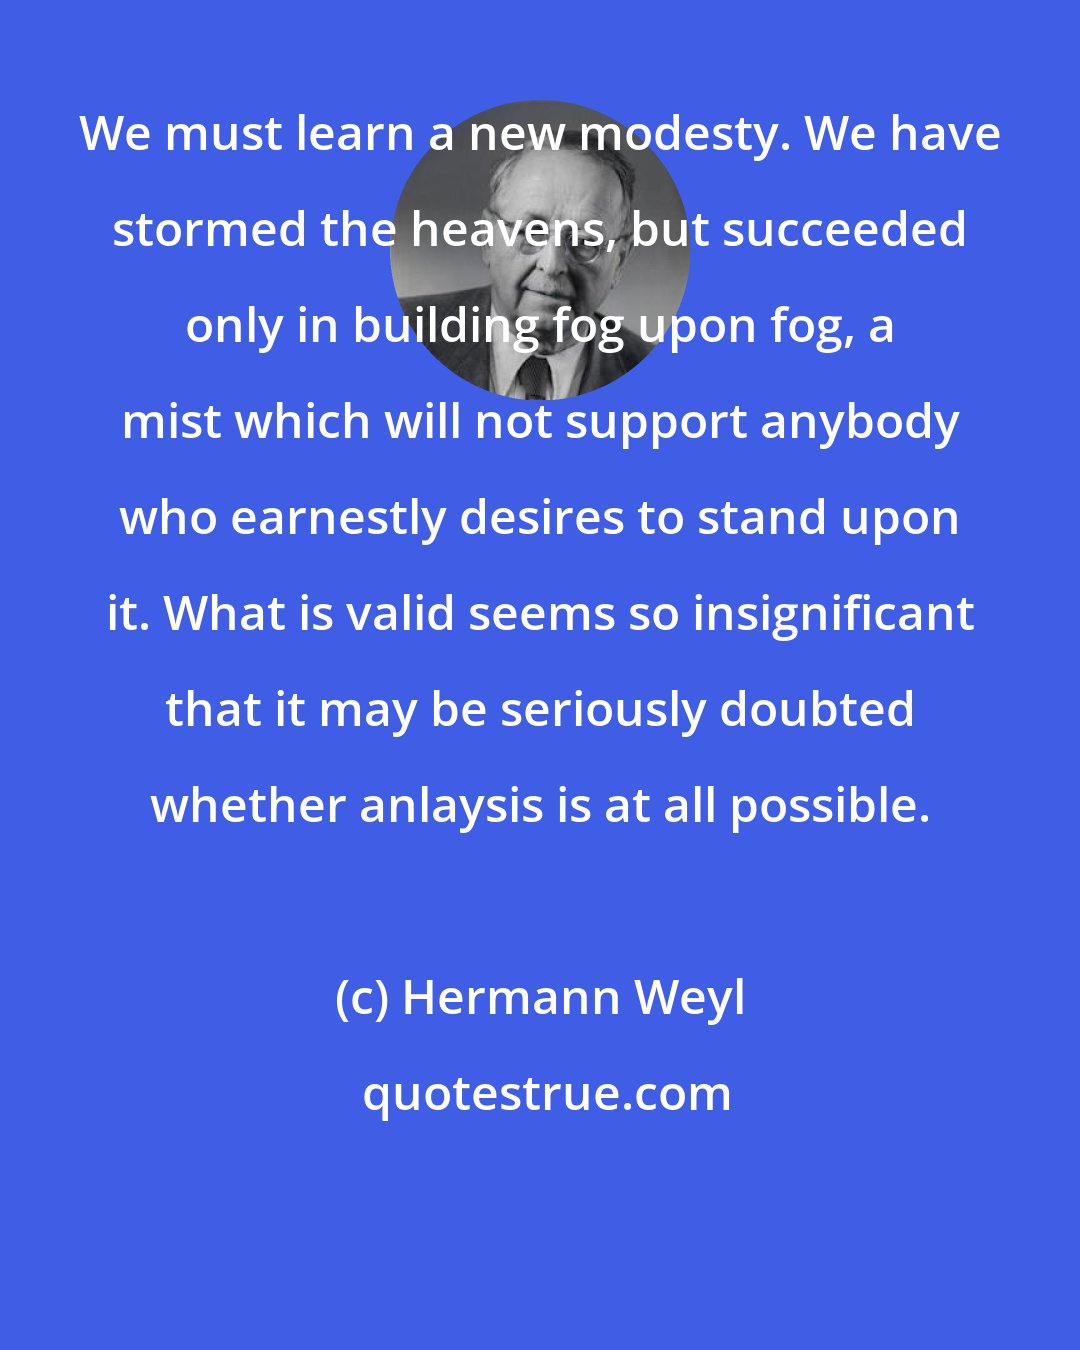 Hermann Weyl: We must learn a new modesty. We have stormed the heavens, but succeeded only in building fog upon fog, a mist which will not support anybody who earnestly desires to stand upon it. What is valid seems so insignificant that it may be seriously doubted whether anlaysis is at all possible.